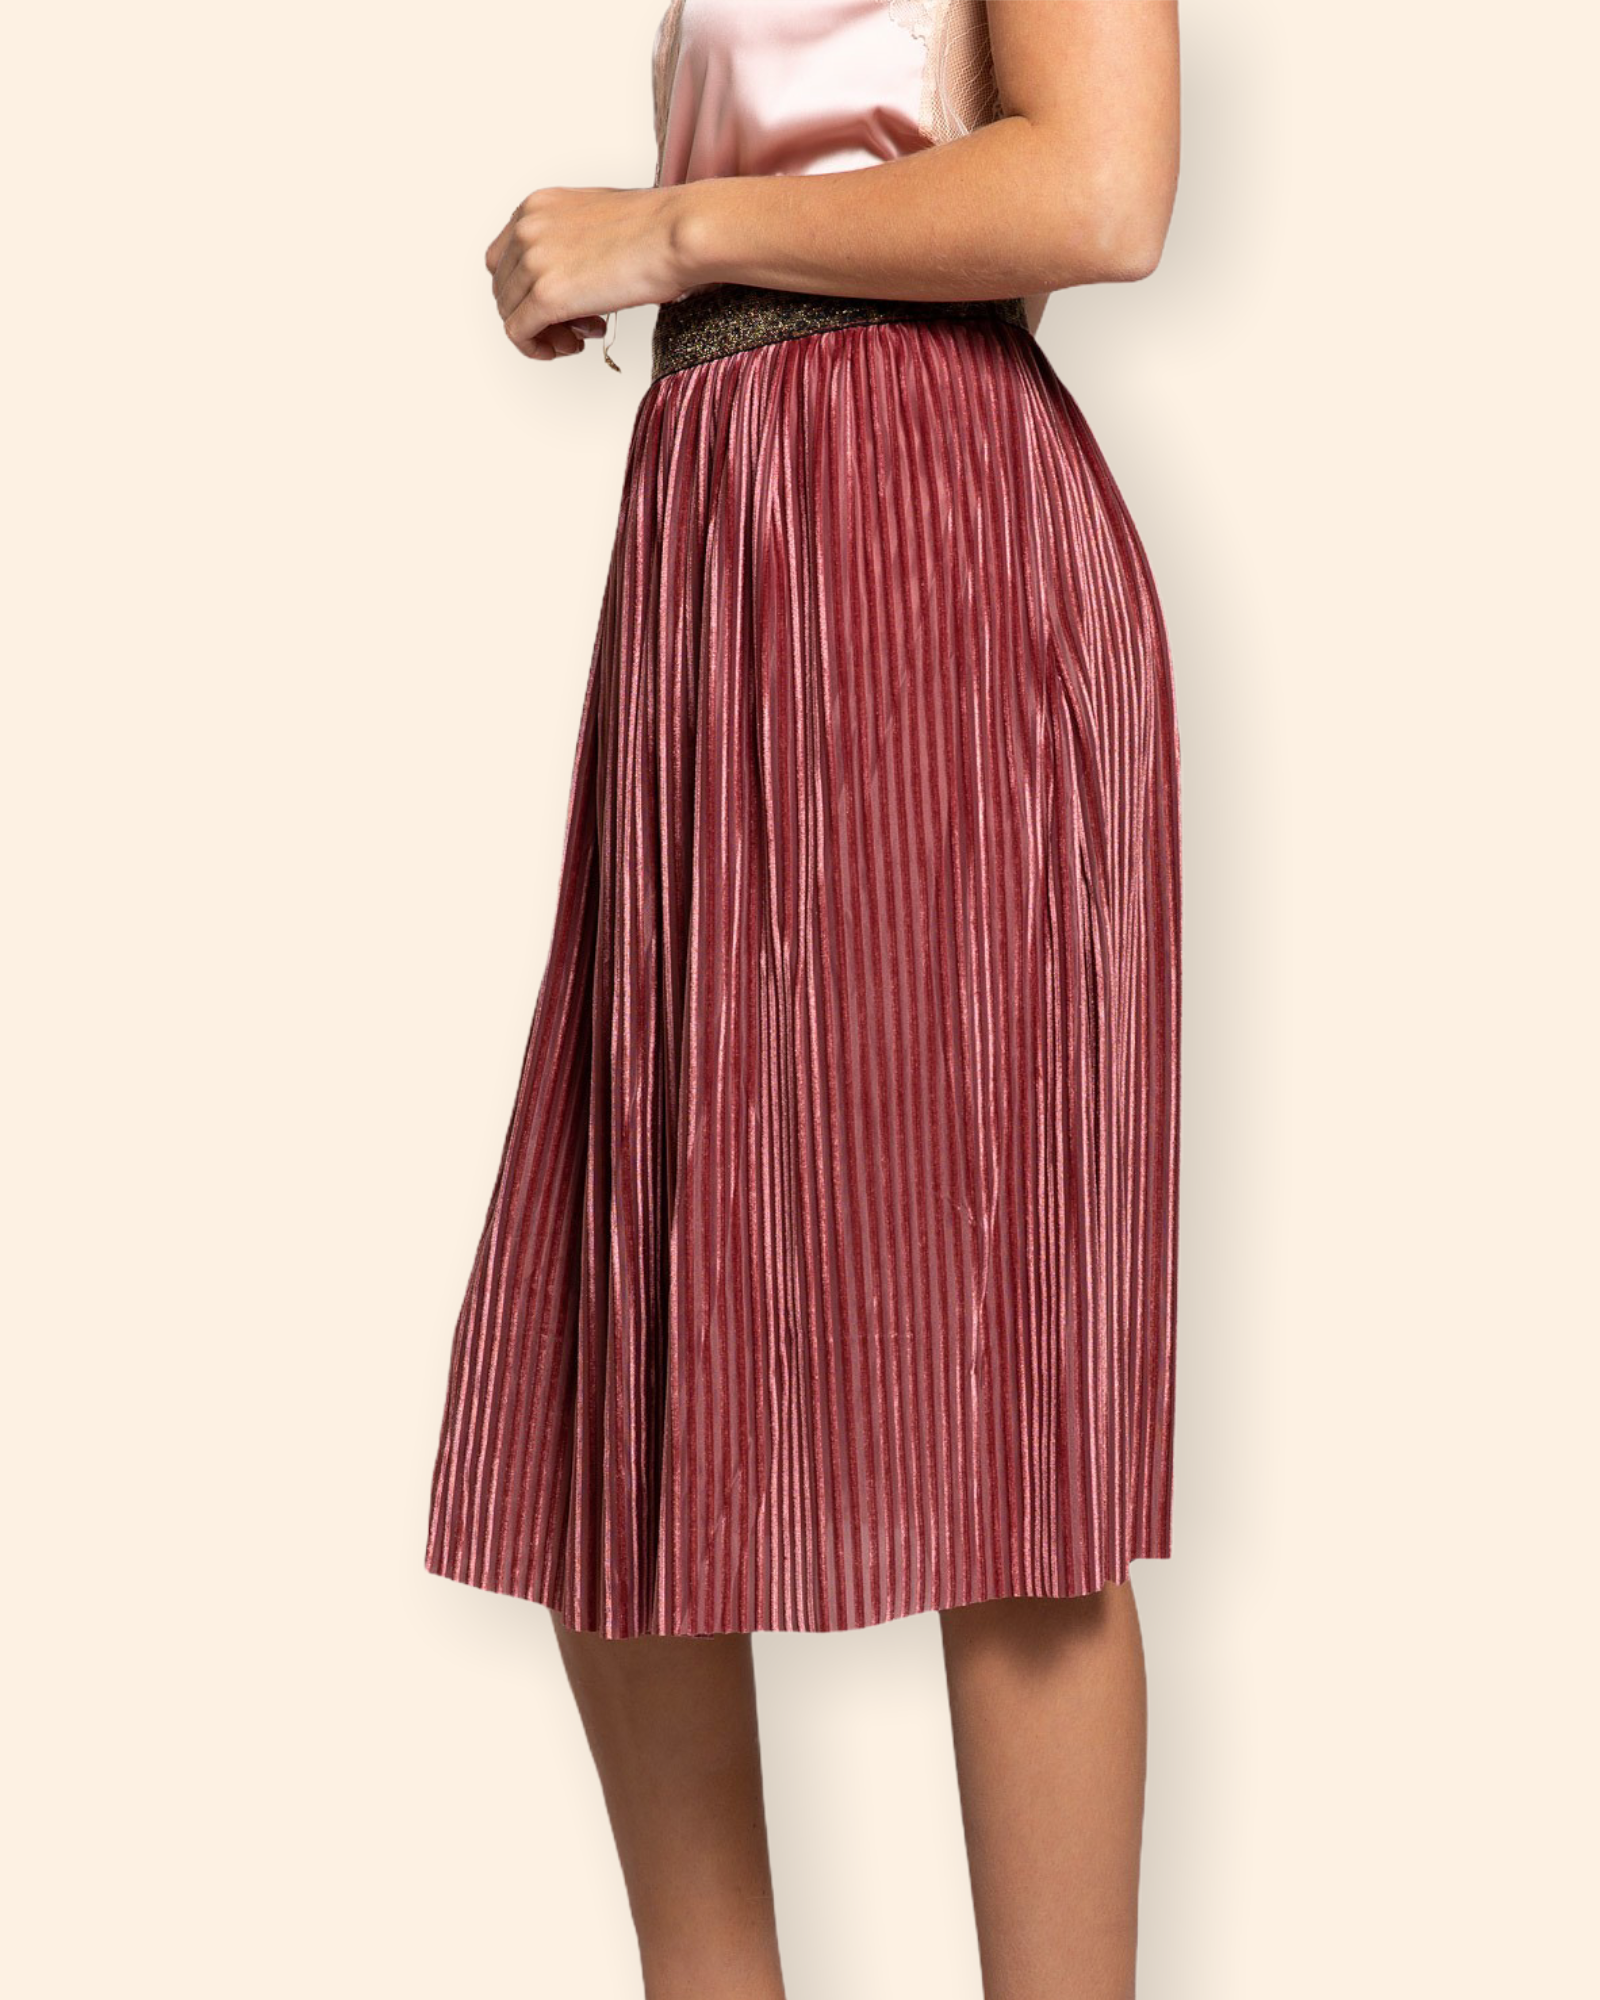 Glamour Pop Skirt in Brown